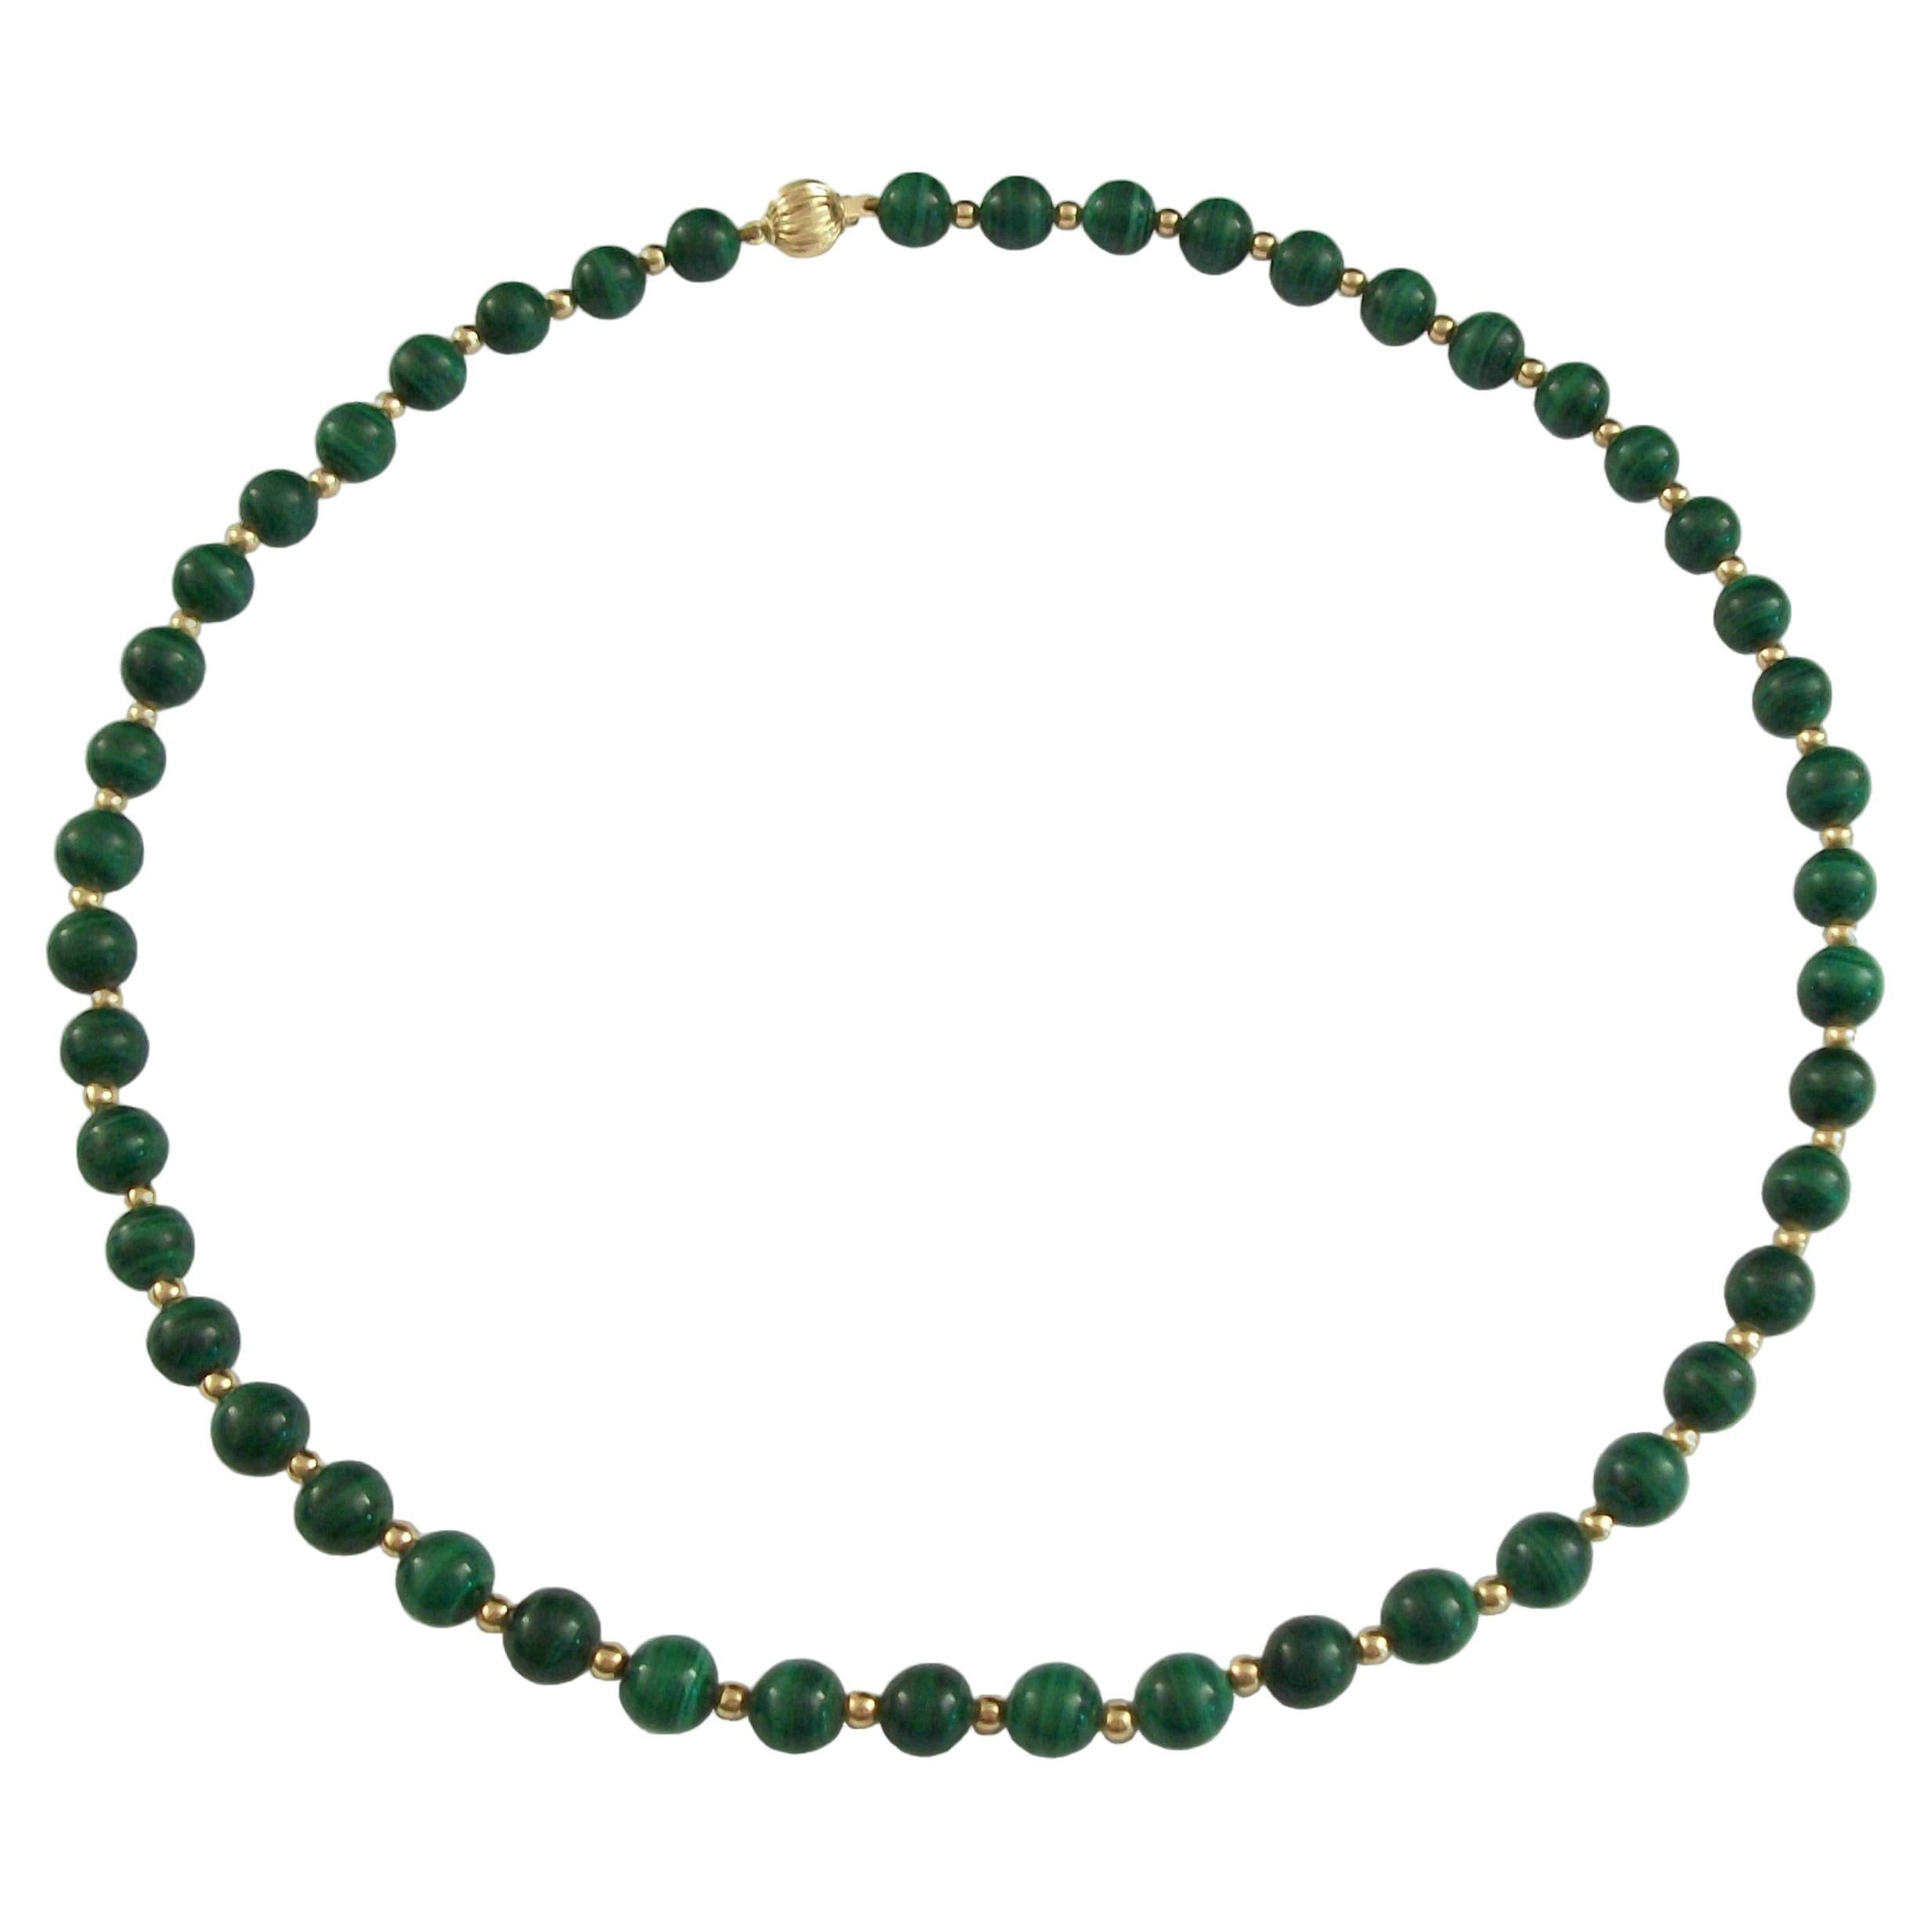 Vintage Malachite & 14K Gold Beaded Necklace - France - Late 20th Century